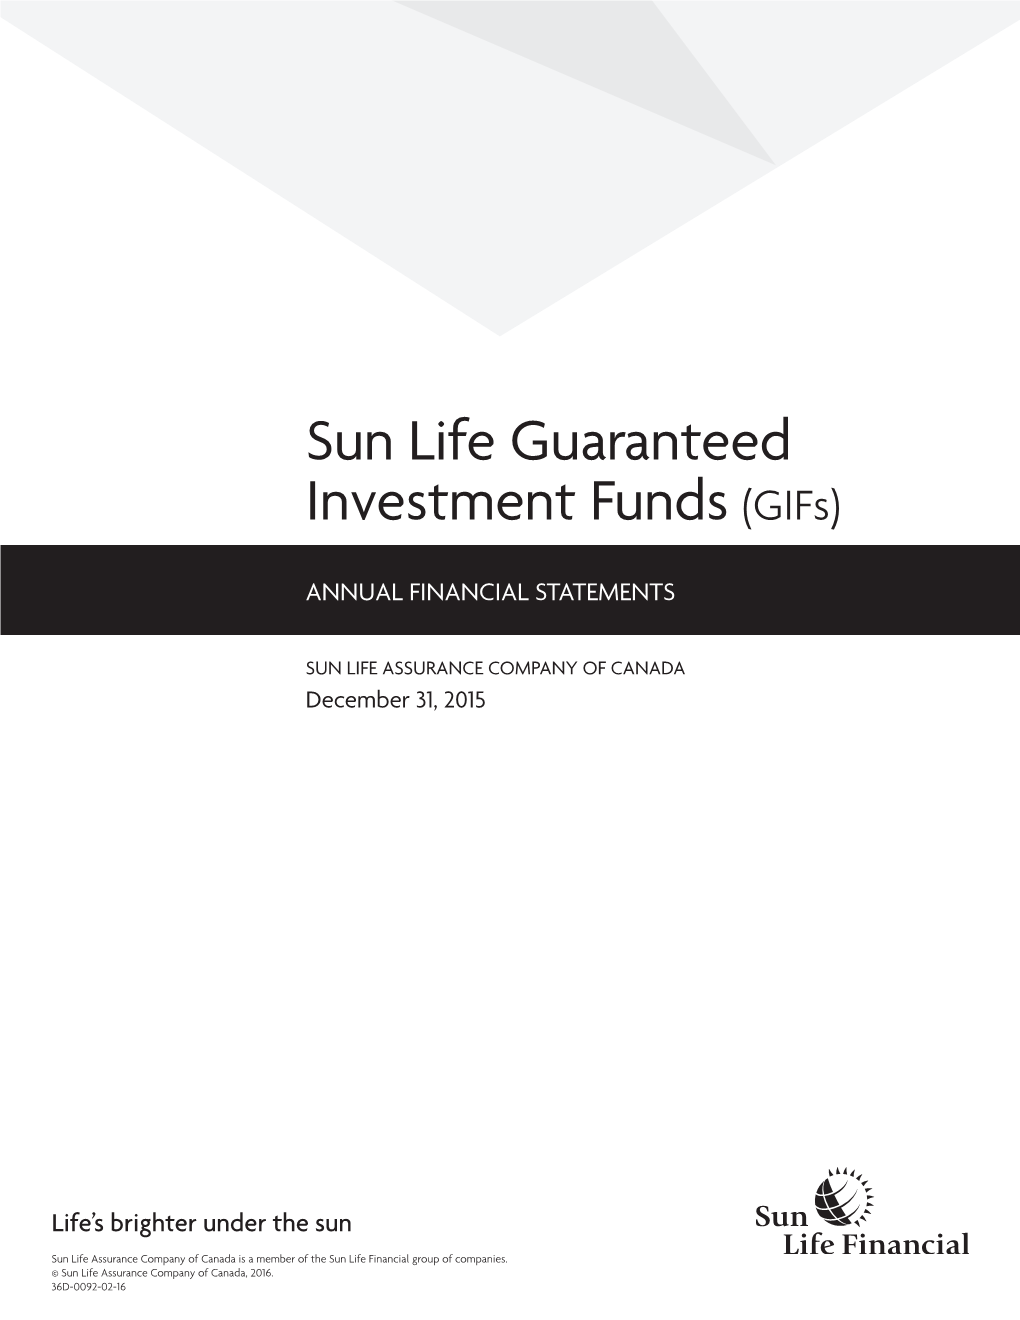 Sun Life Guaranteed Investment Funds (Gifs)